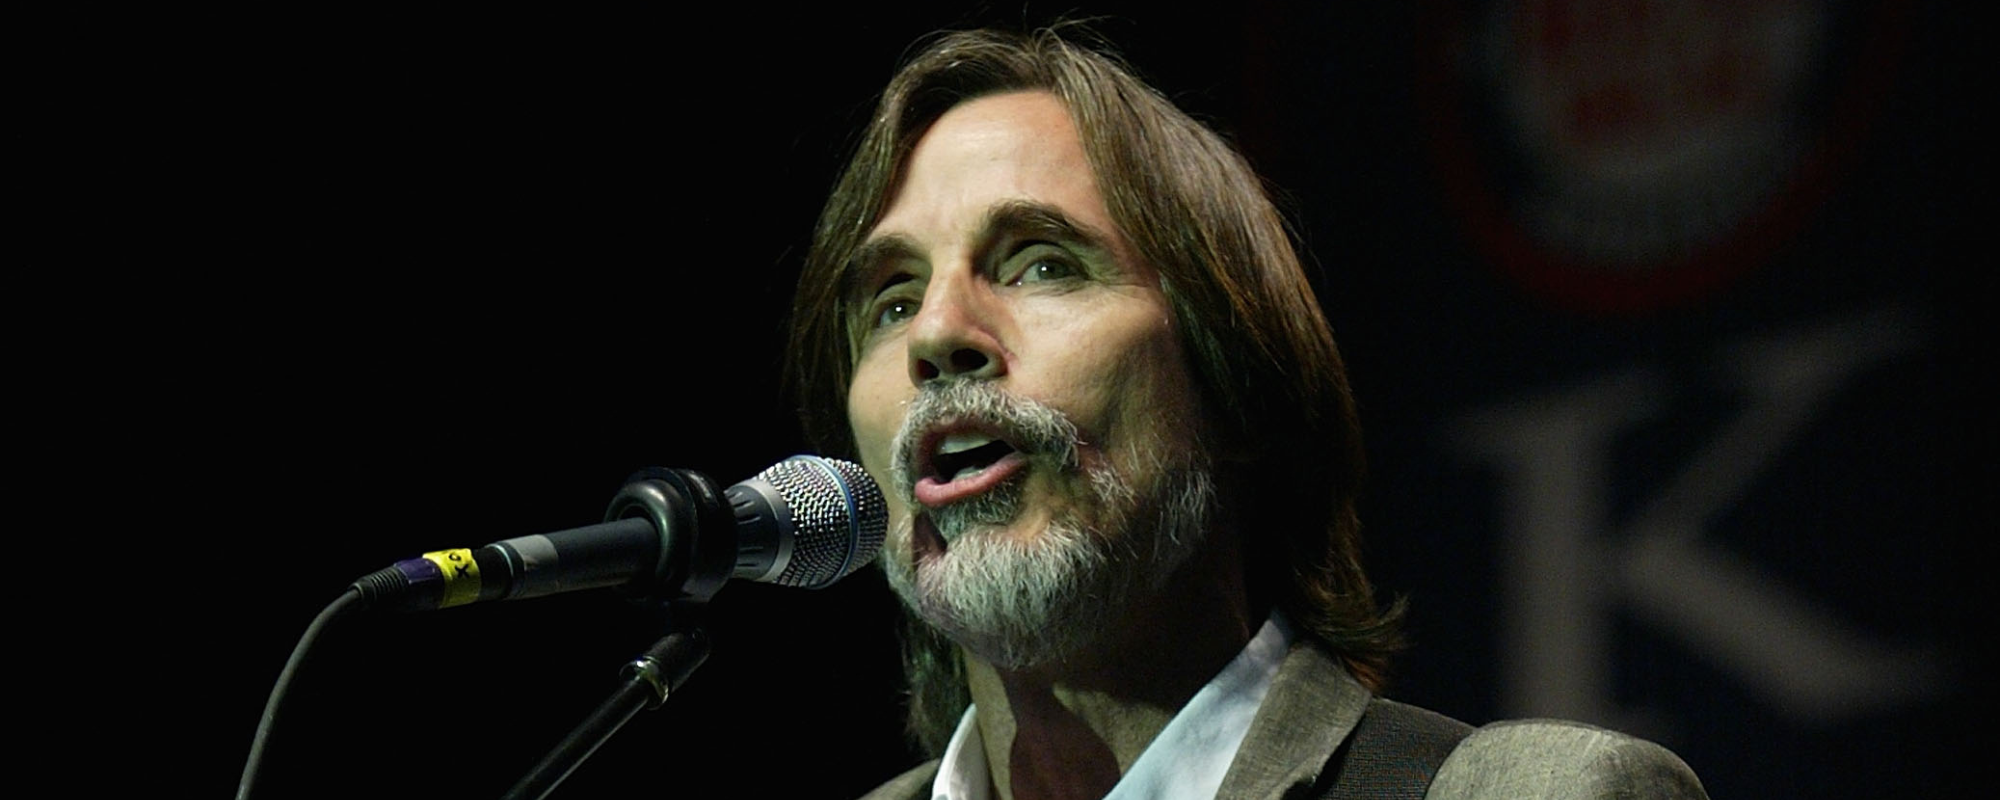 A Cautionary Tale and the First Call to Action of Its Kind: The Meaning Behind Jackson Browne’s “Before the Deluge”